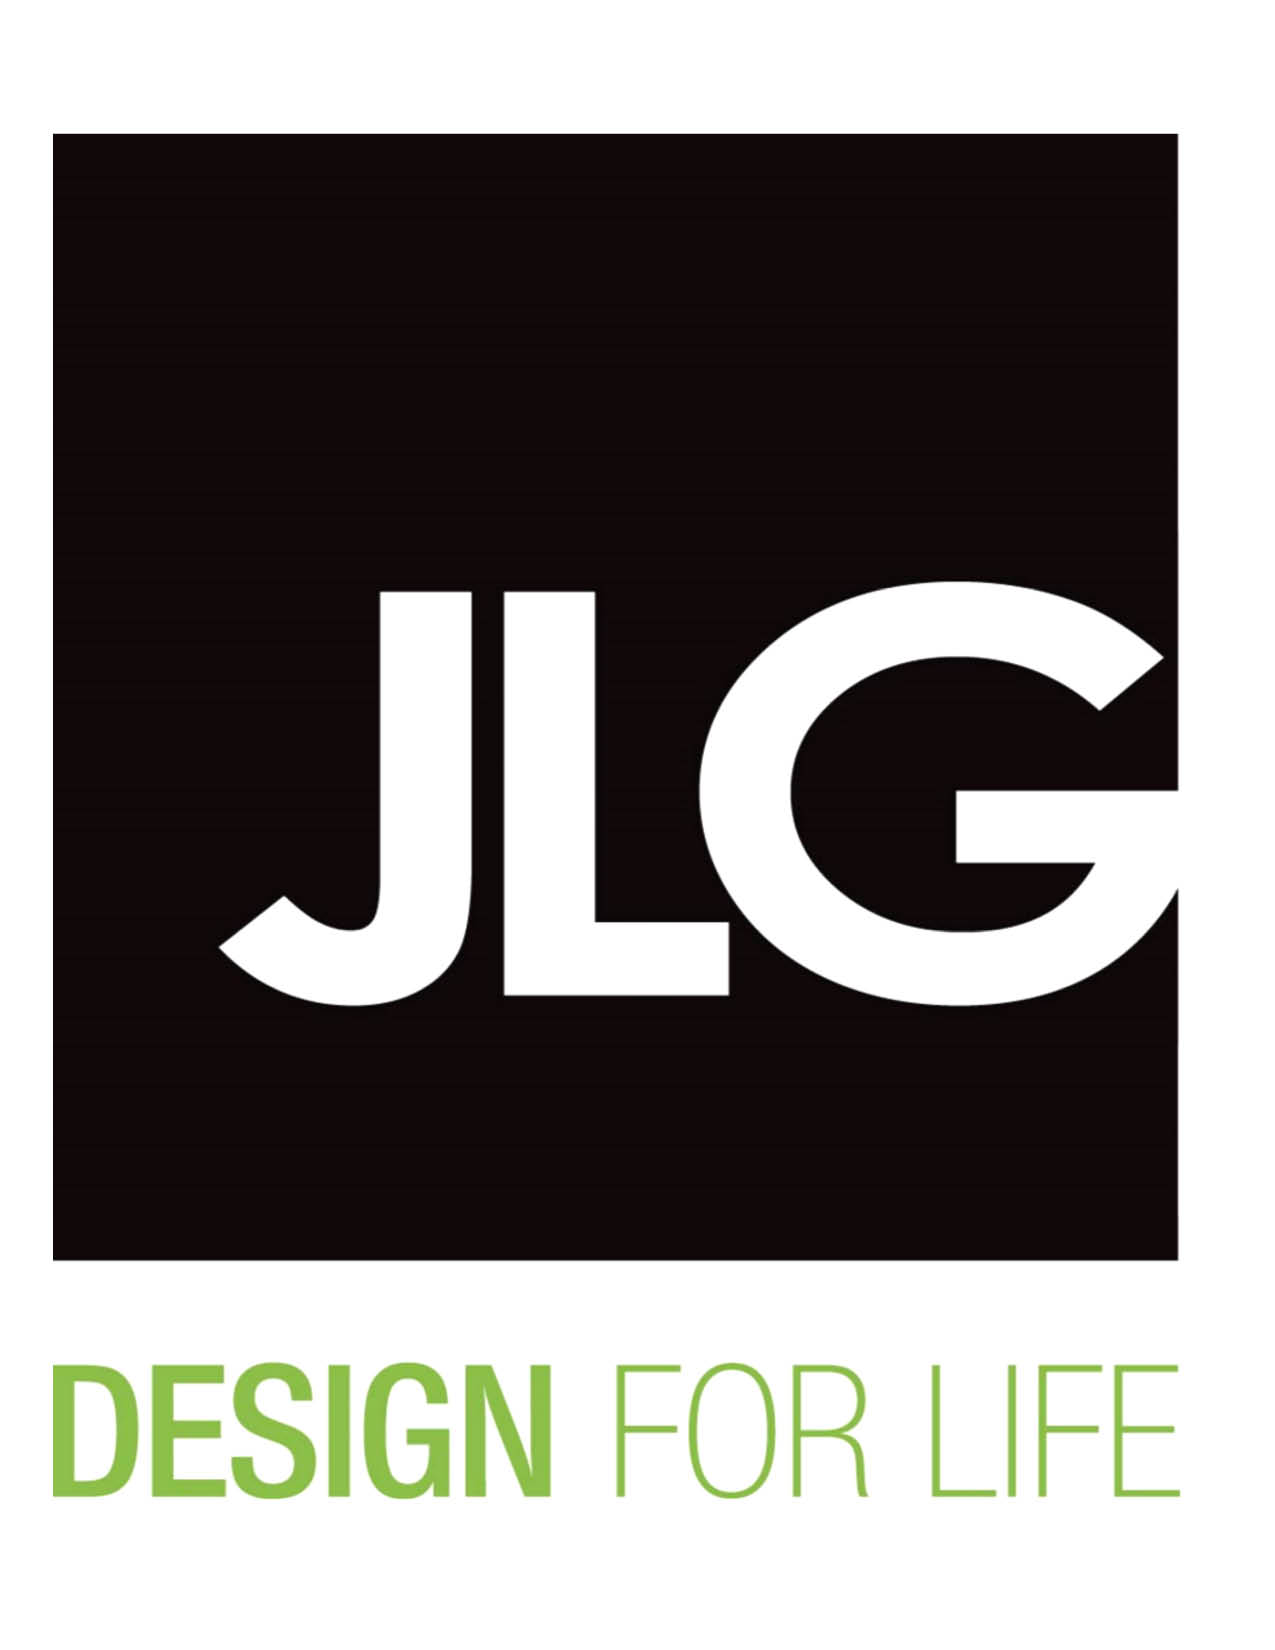 This graphic shows the logo for JLG Design